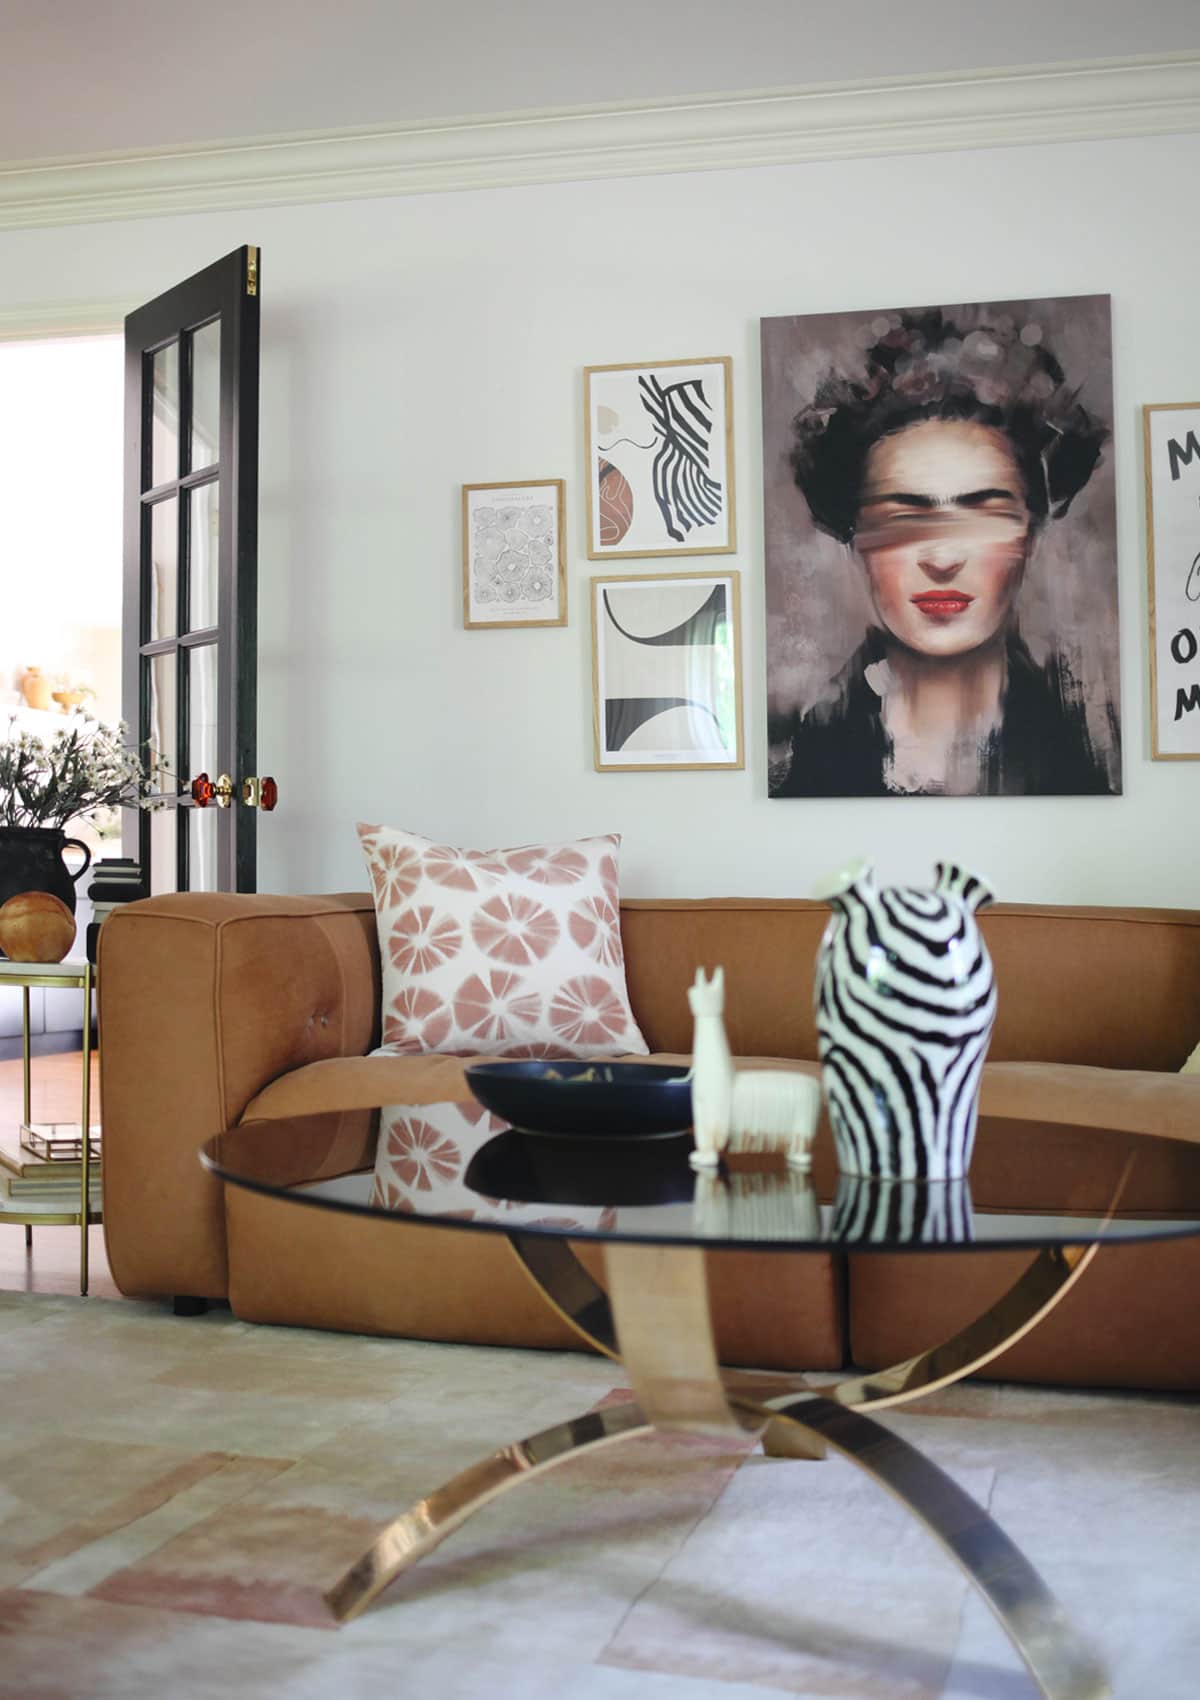 Gallery Wall Ideas - Affordable modern art prints from Desenio. Mix and match your art for an eclectic look and feel.